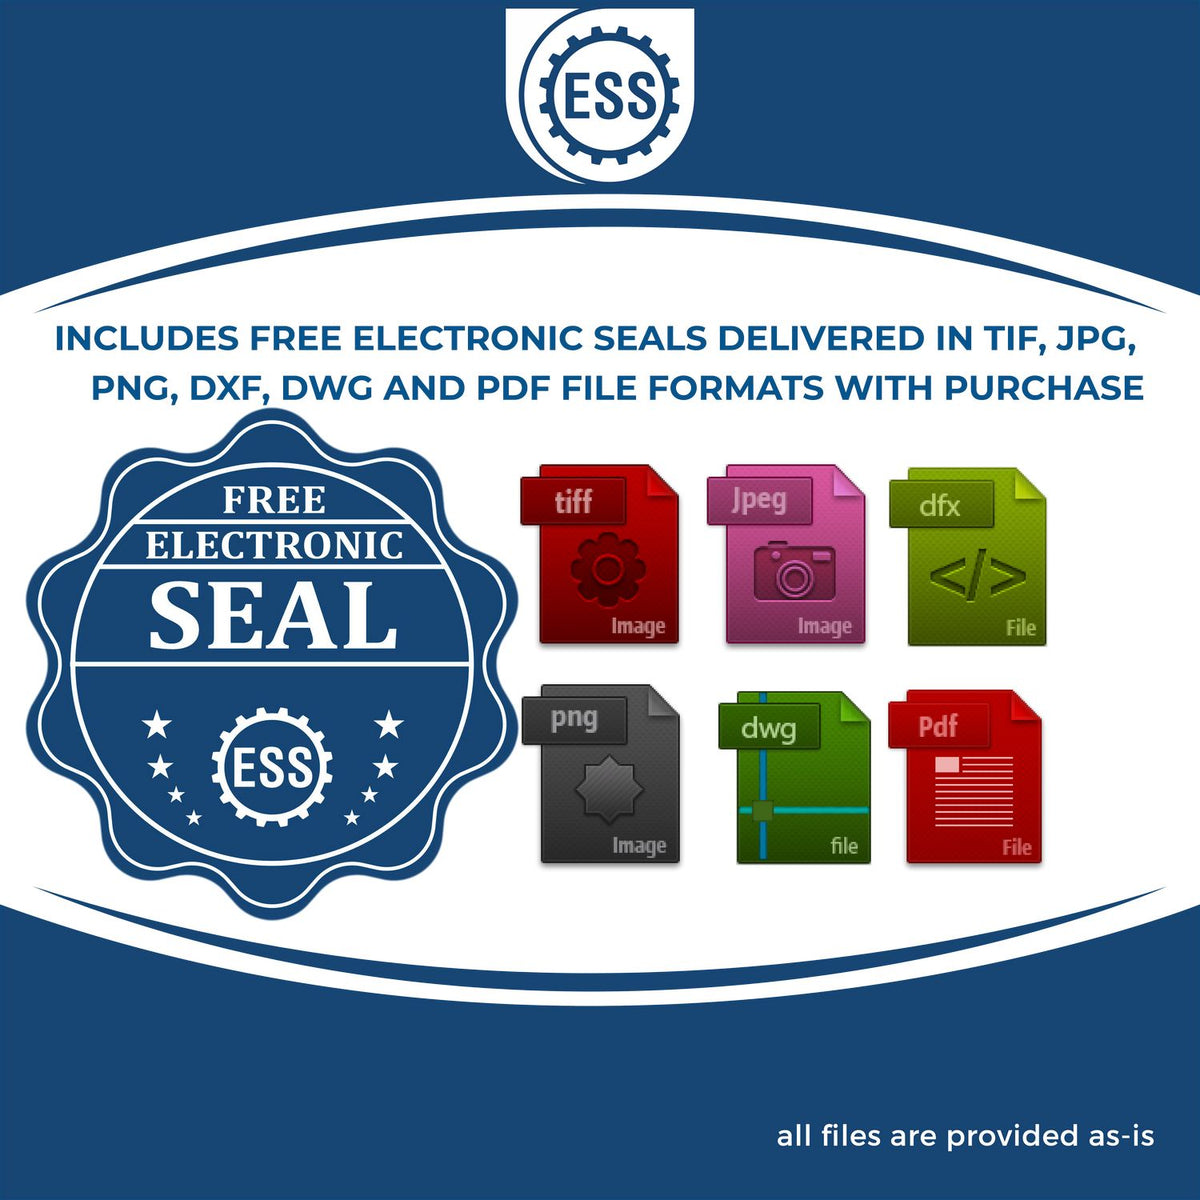 An infographic for the free electronic seal for the Slim Pre-Inked Pennsylvania Landscape Architect Seal Stamp illustrating the different file type icons such as DXF, DWG, TIF, JPG and PNG.